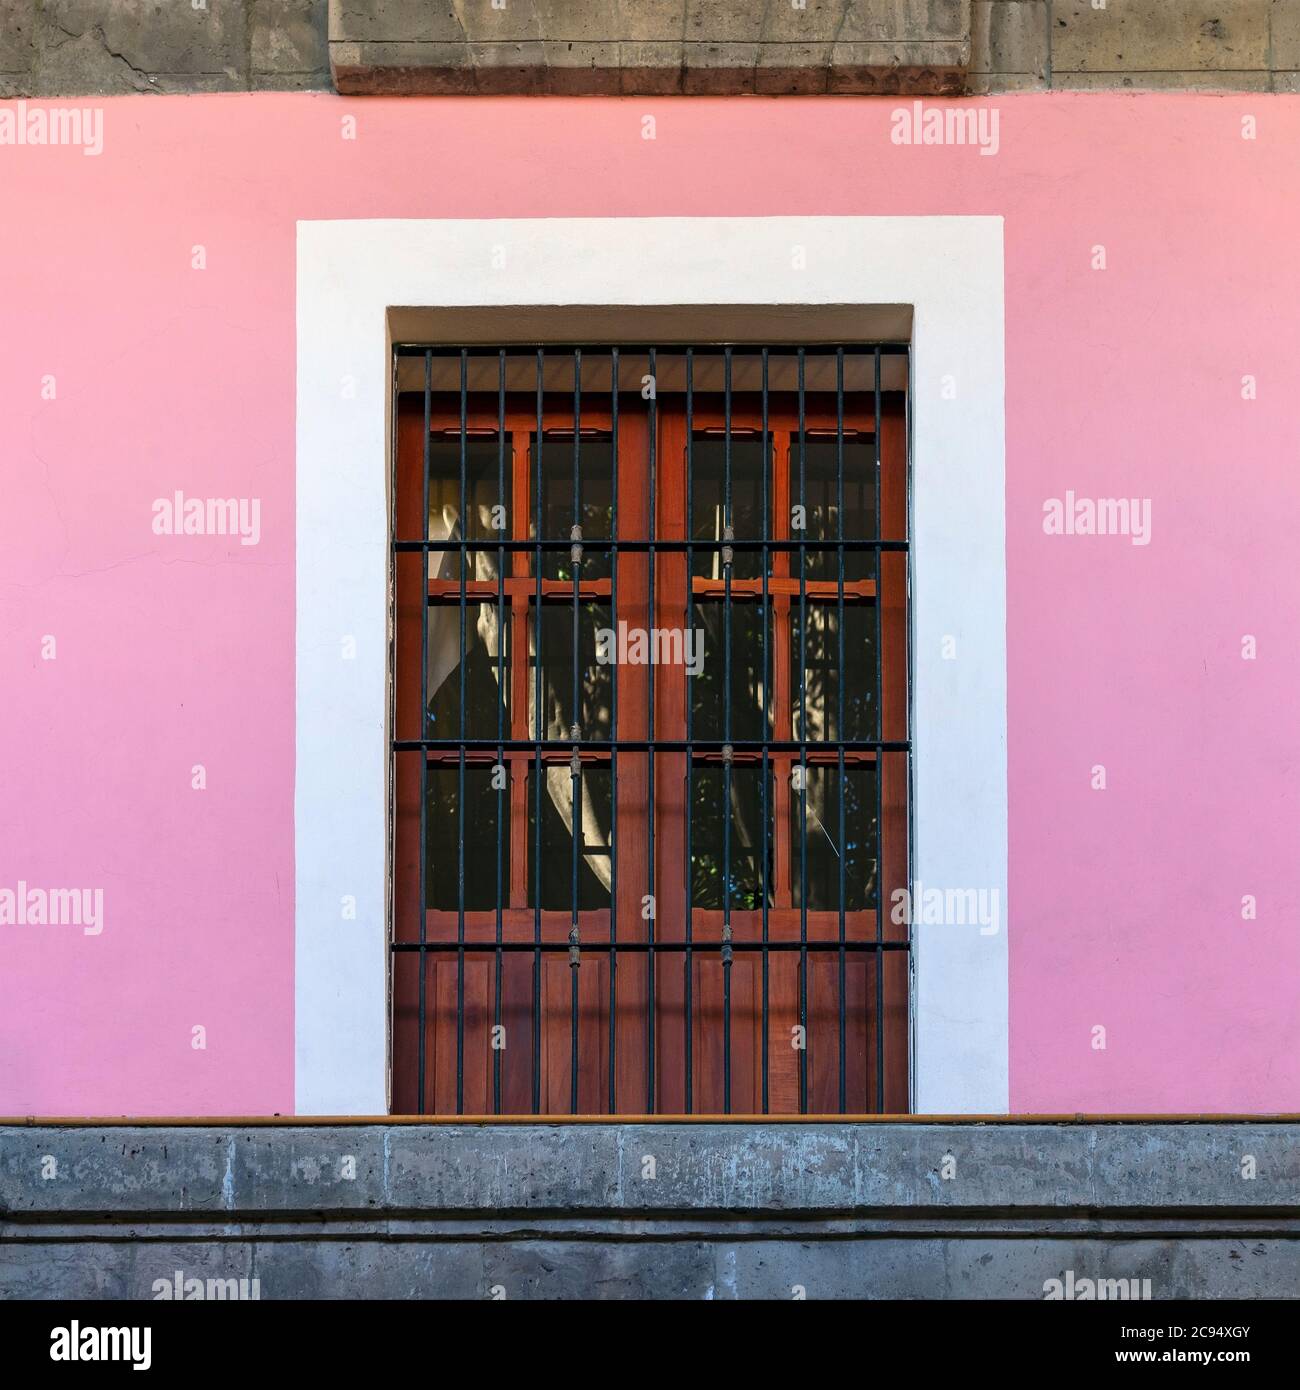 Traditional colonial style architecture in the district of Coyoacan with a wooden window frame and pink facade wall, Mexico City, Mexico. Stock Photo